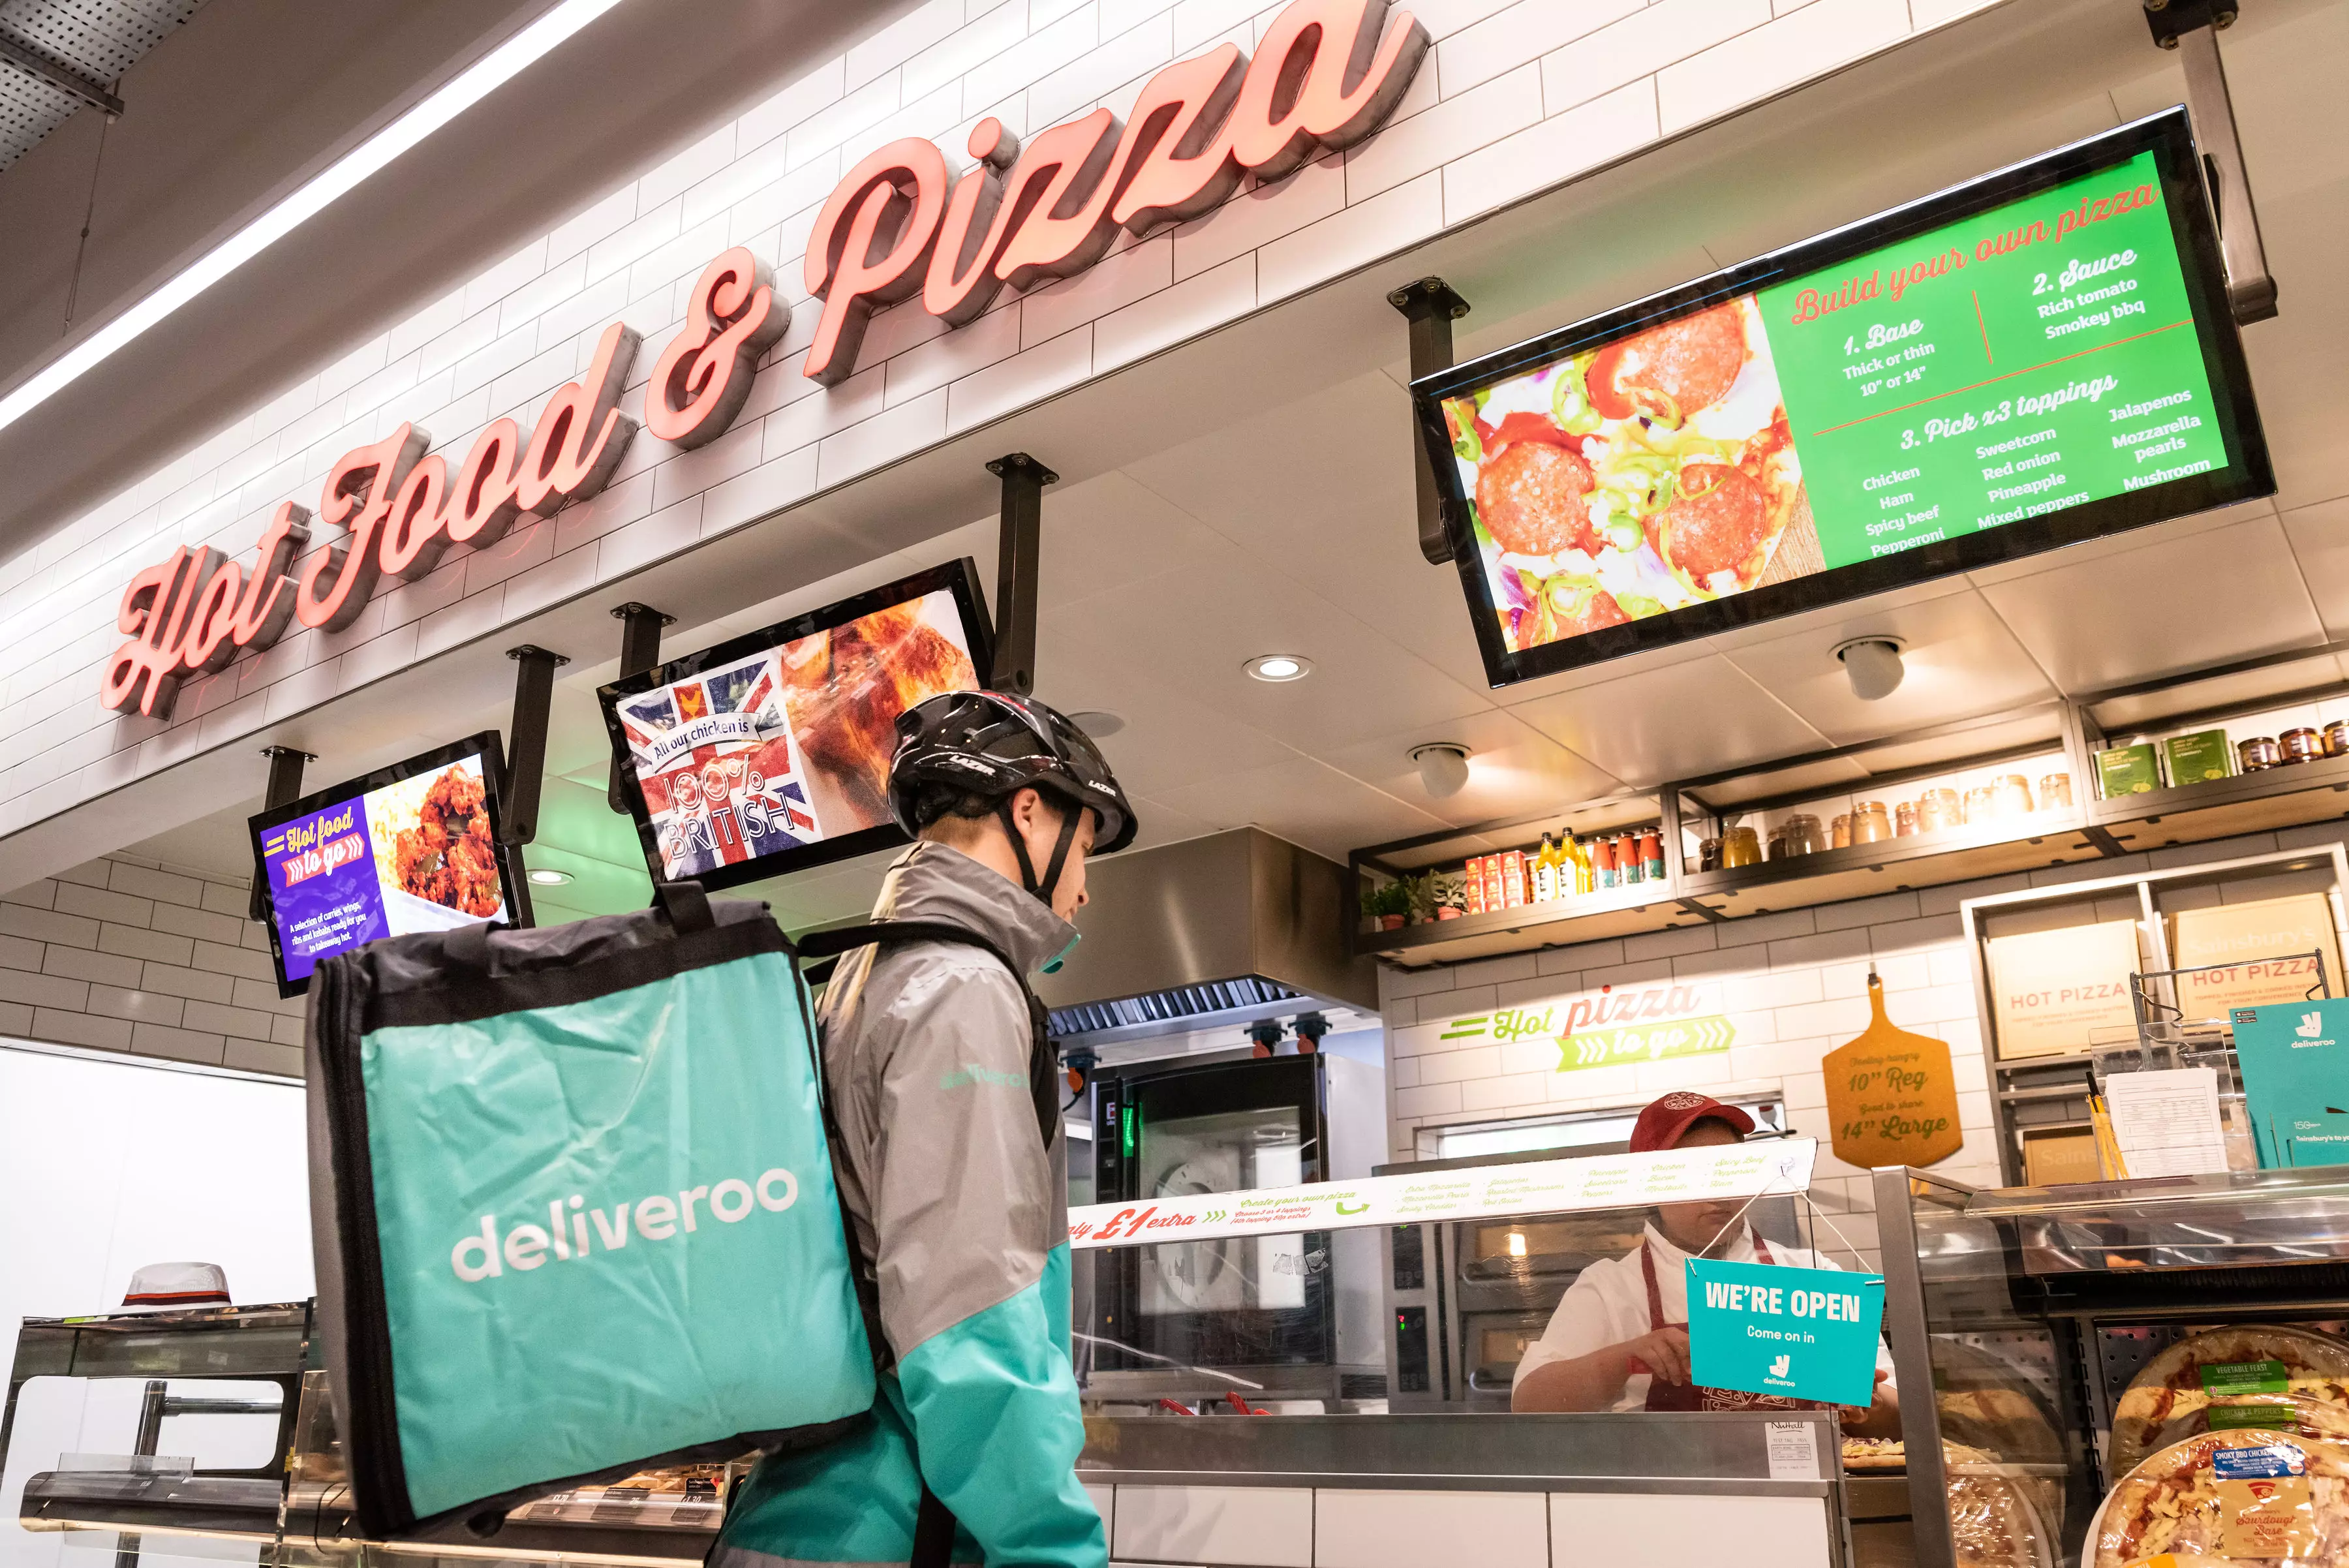 Sainsbury's has become the first UK supermarket to deliver hot takeaways via Deliveroo.